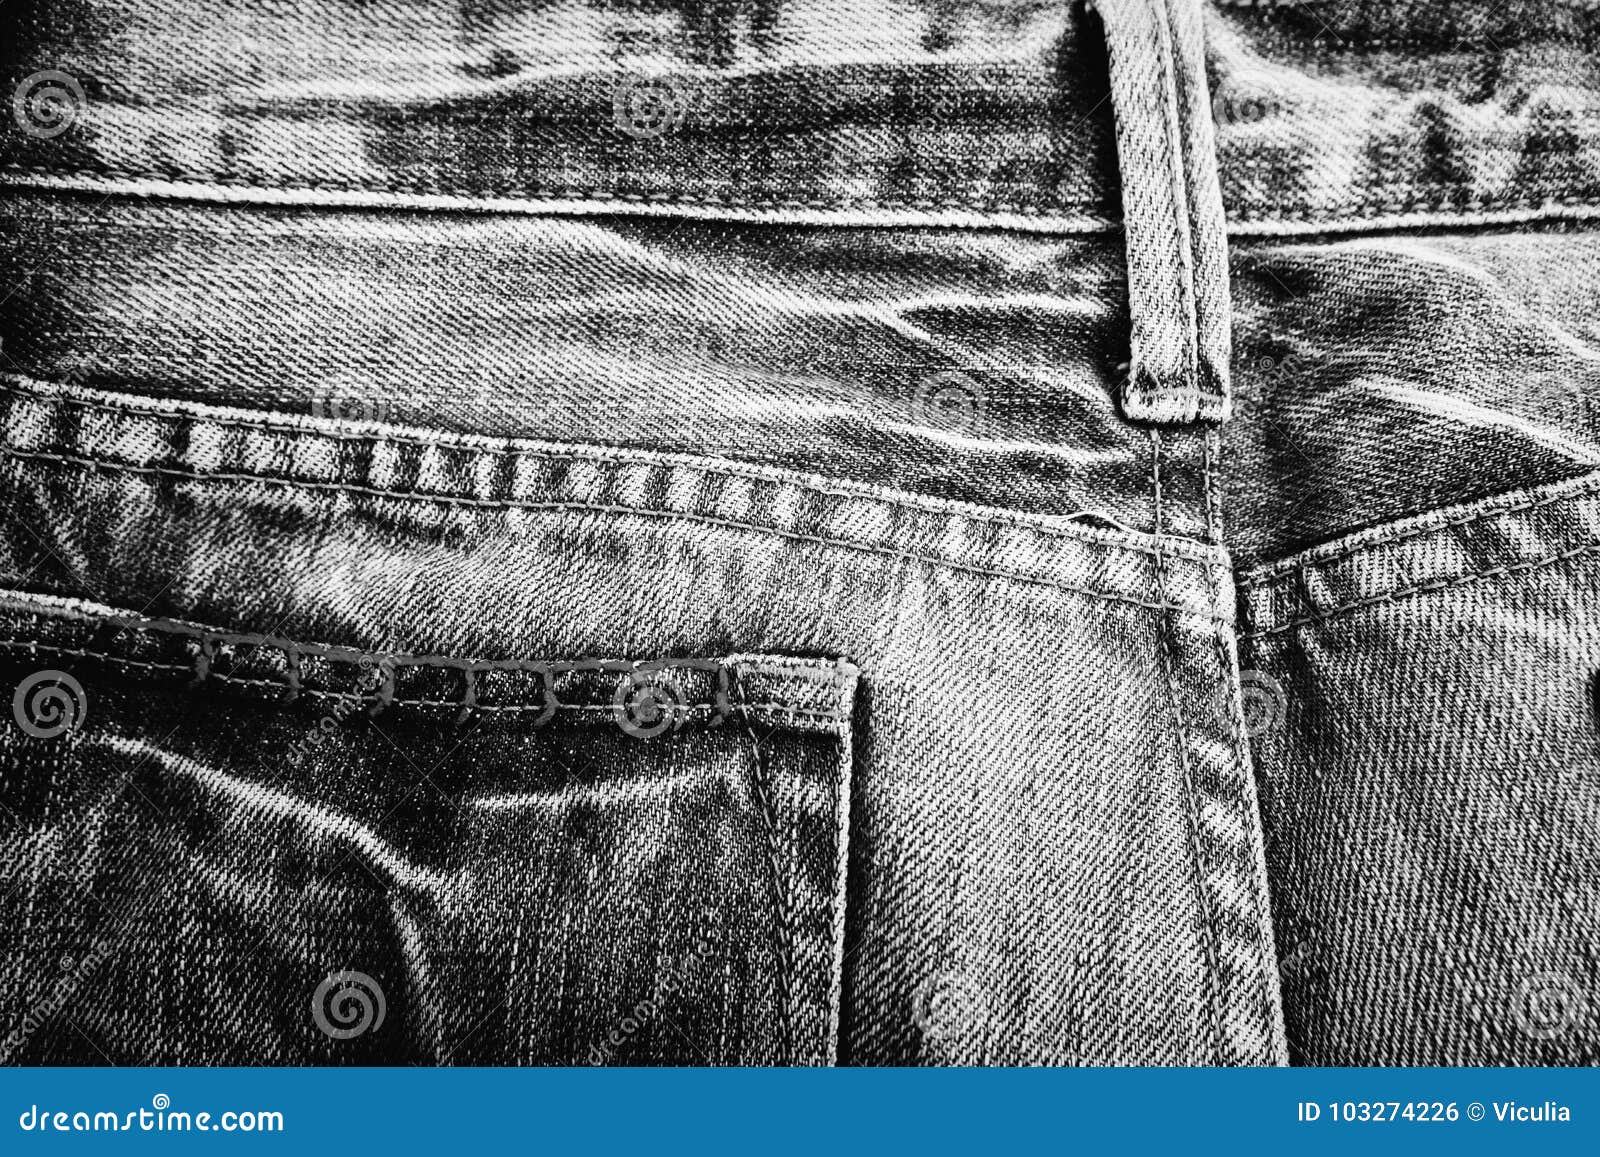 Denim Jeans Background with Seam of Jeans Fashion Design. Stock Photo ...